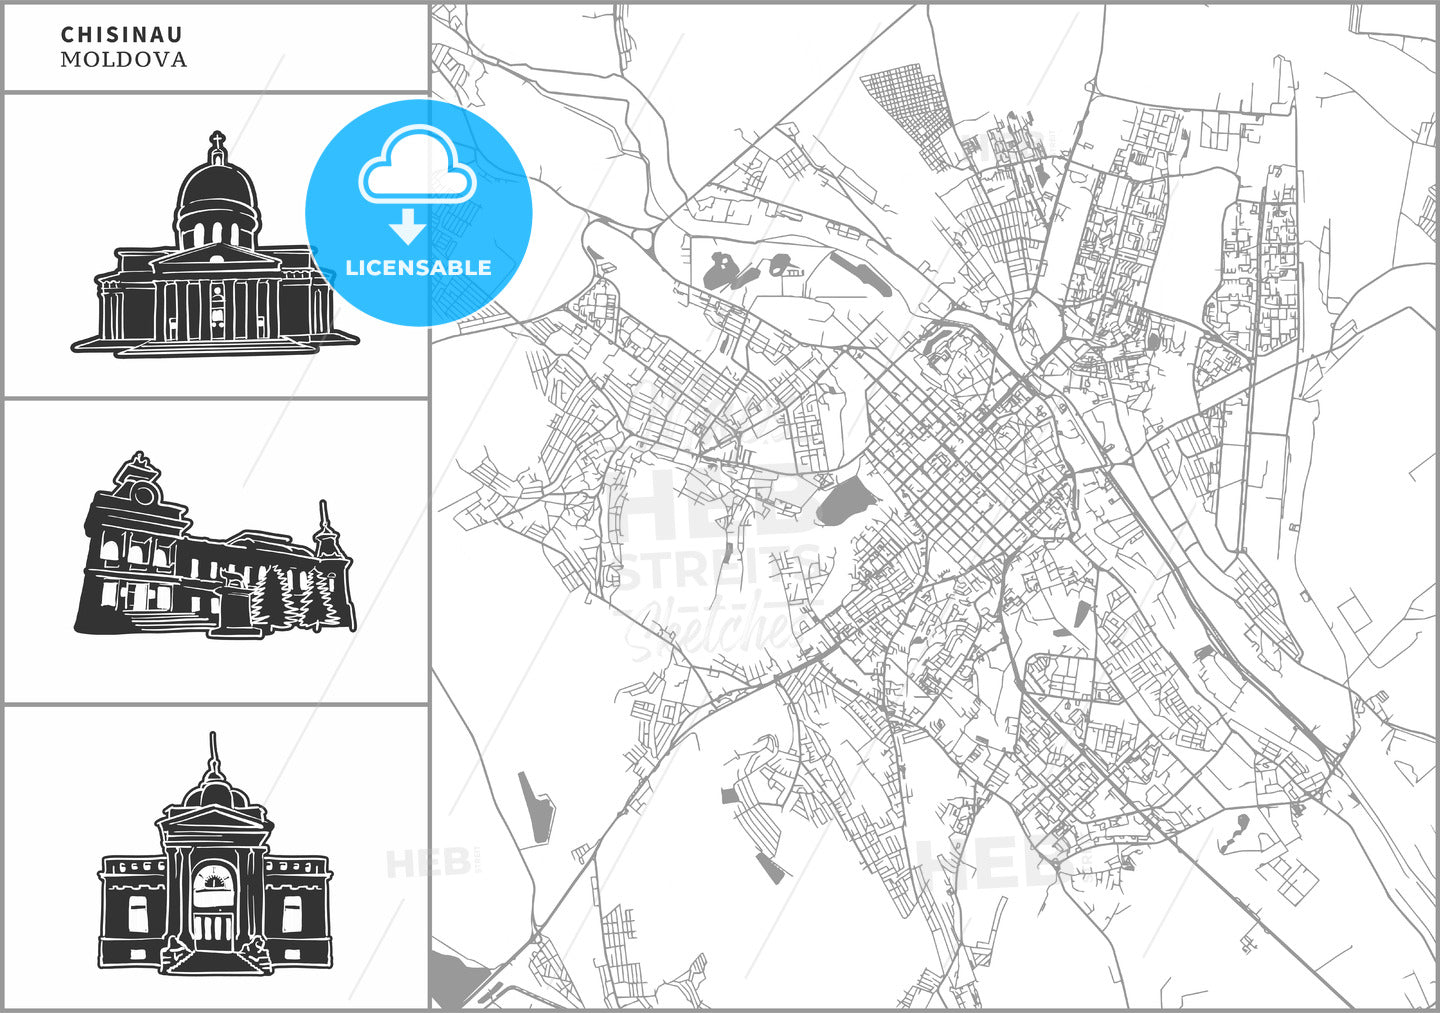 Chisinau city map with hand-drawn architecture icons